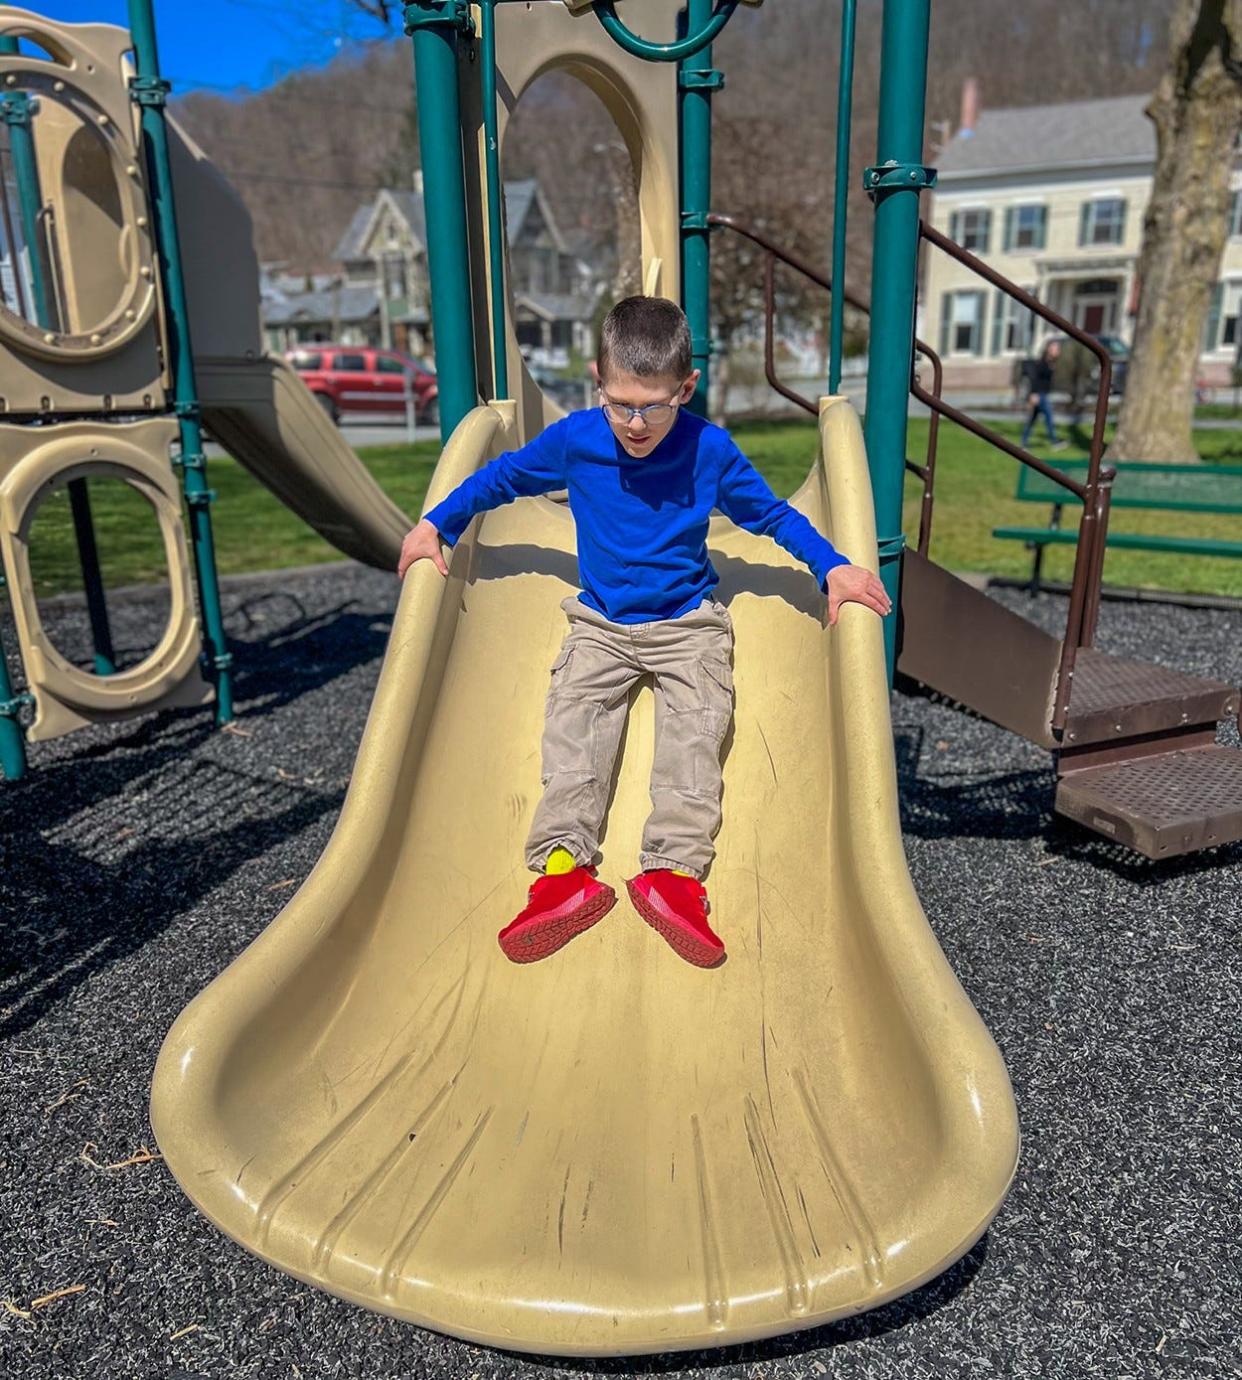 The last full week of April is National Pediatric Transplant Week, spotlighting efforts to end the pediatric transplant waiting list. Last year, more than 1,900 children received life-saving transplants, matched from nearly 900 pediatric organ donors, according to Donate Life America. Pictured is Jake Algerio, 10, of Honesdale, who is waiting for a kidney transplant.